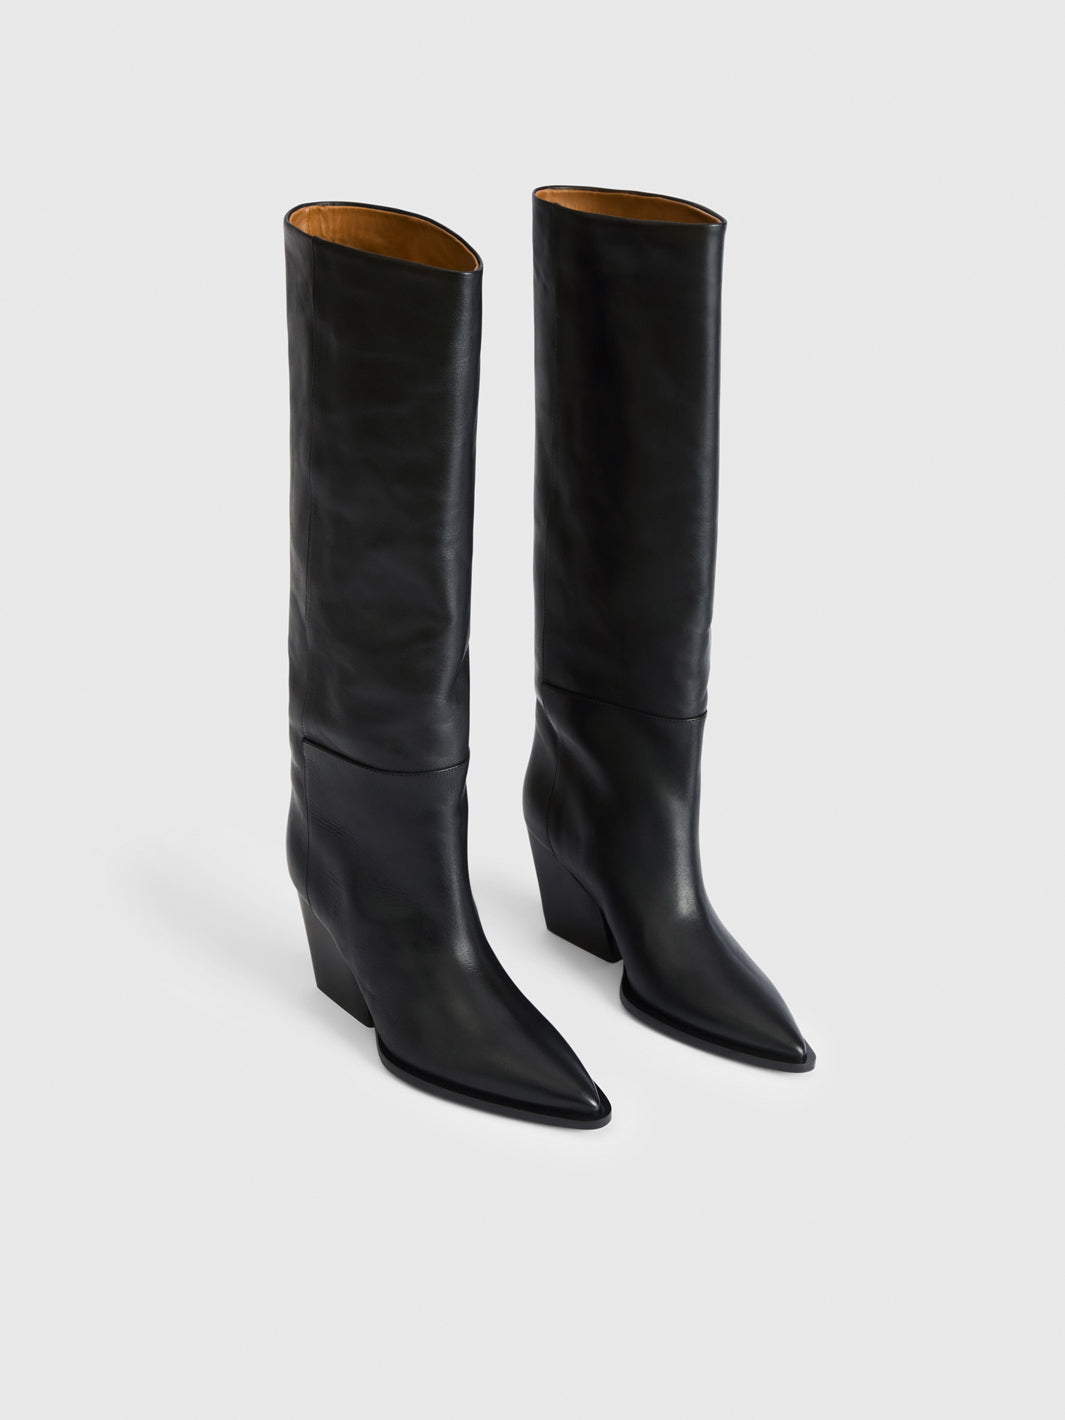 Oderzo Black Leather Knee high western boots